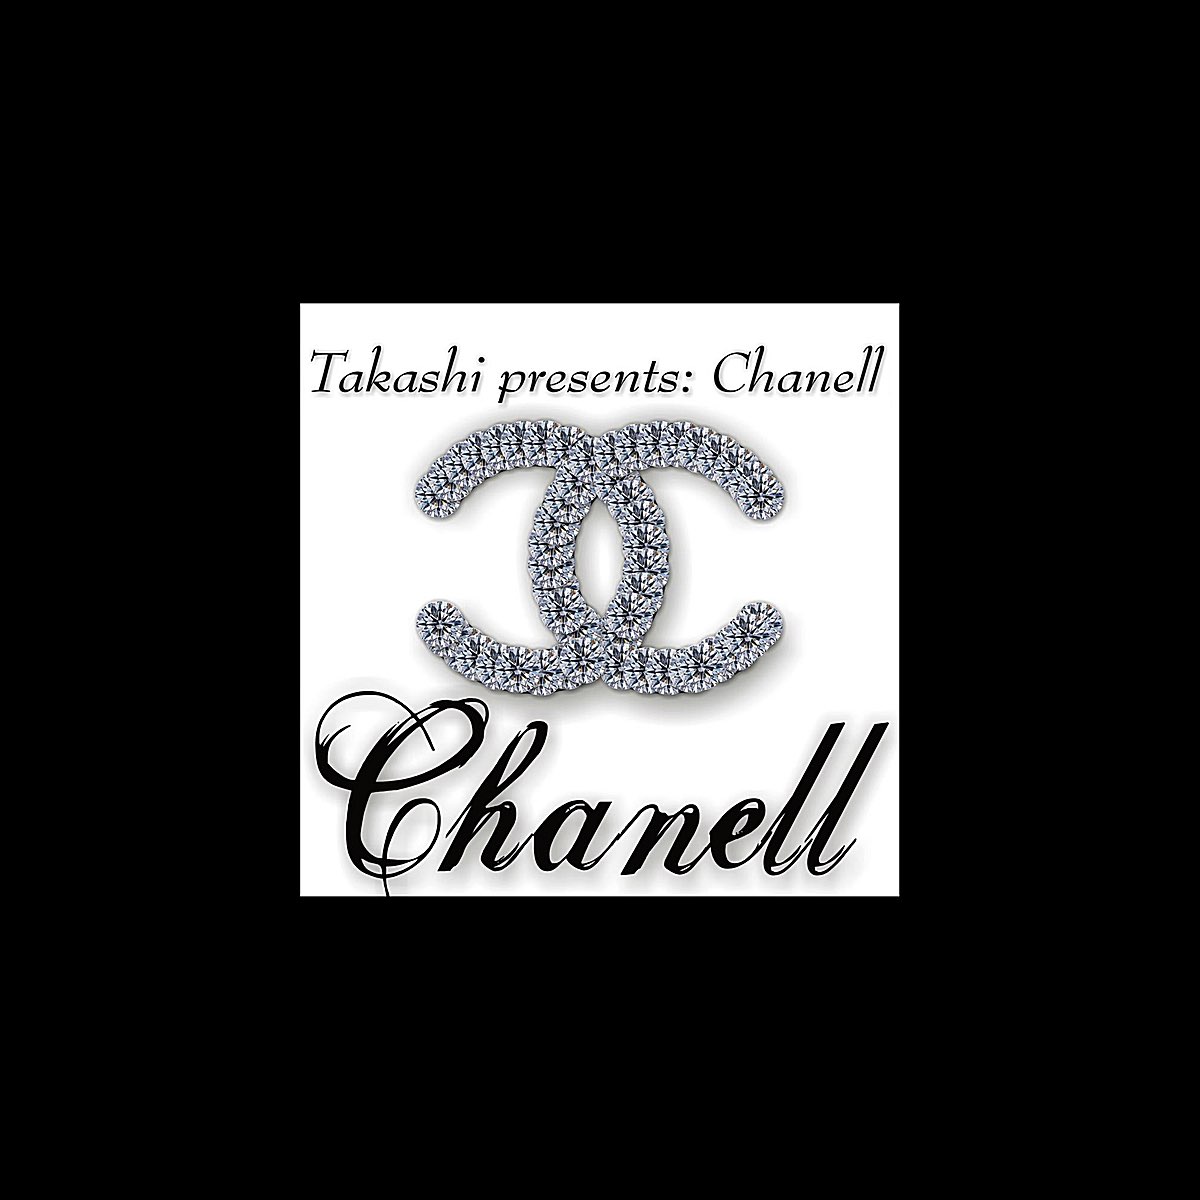 Takashi presents: by Chanell Music